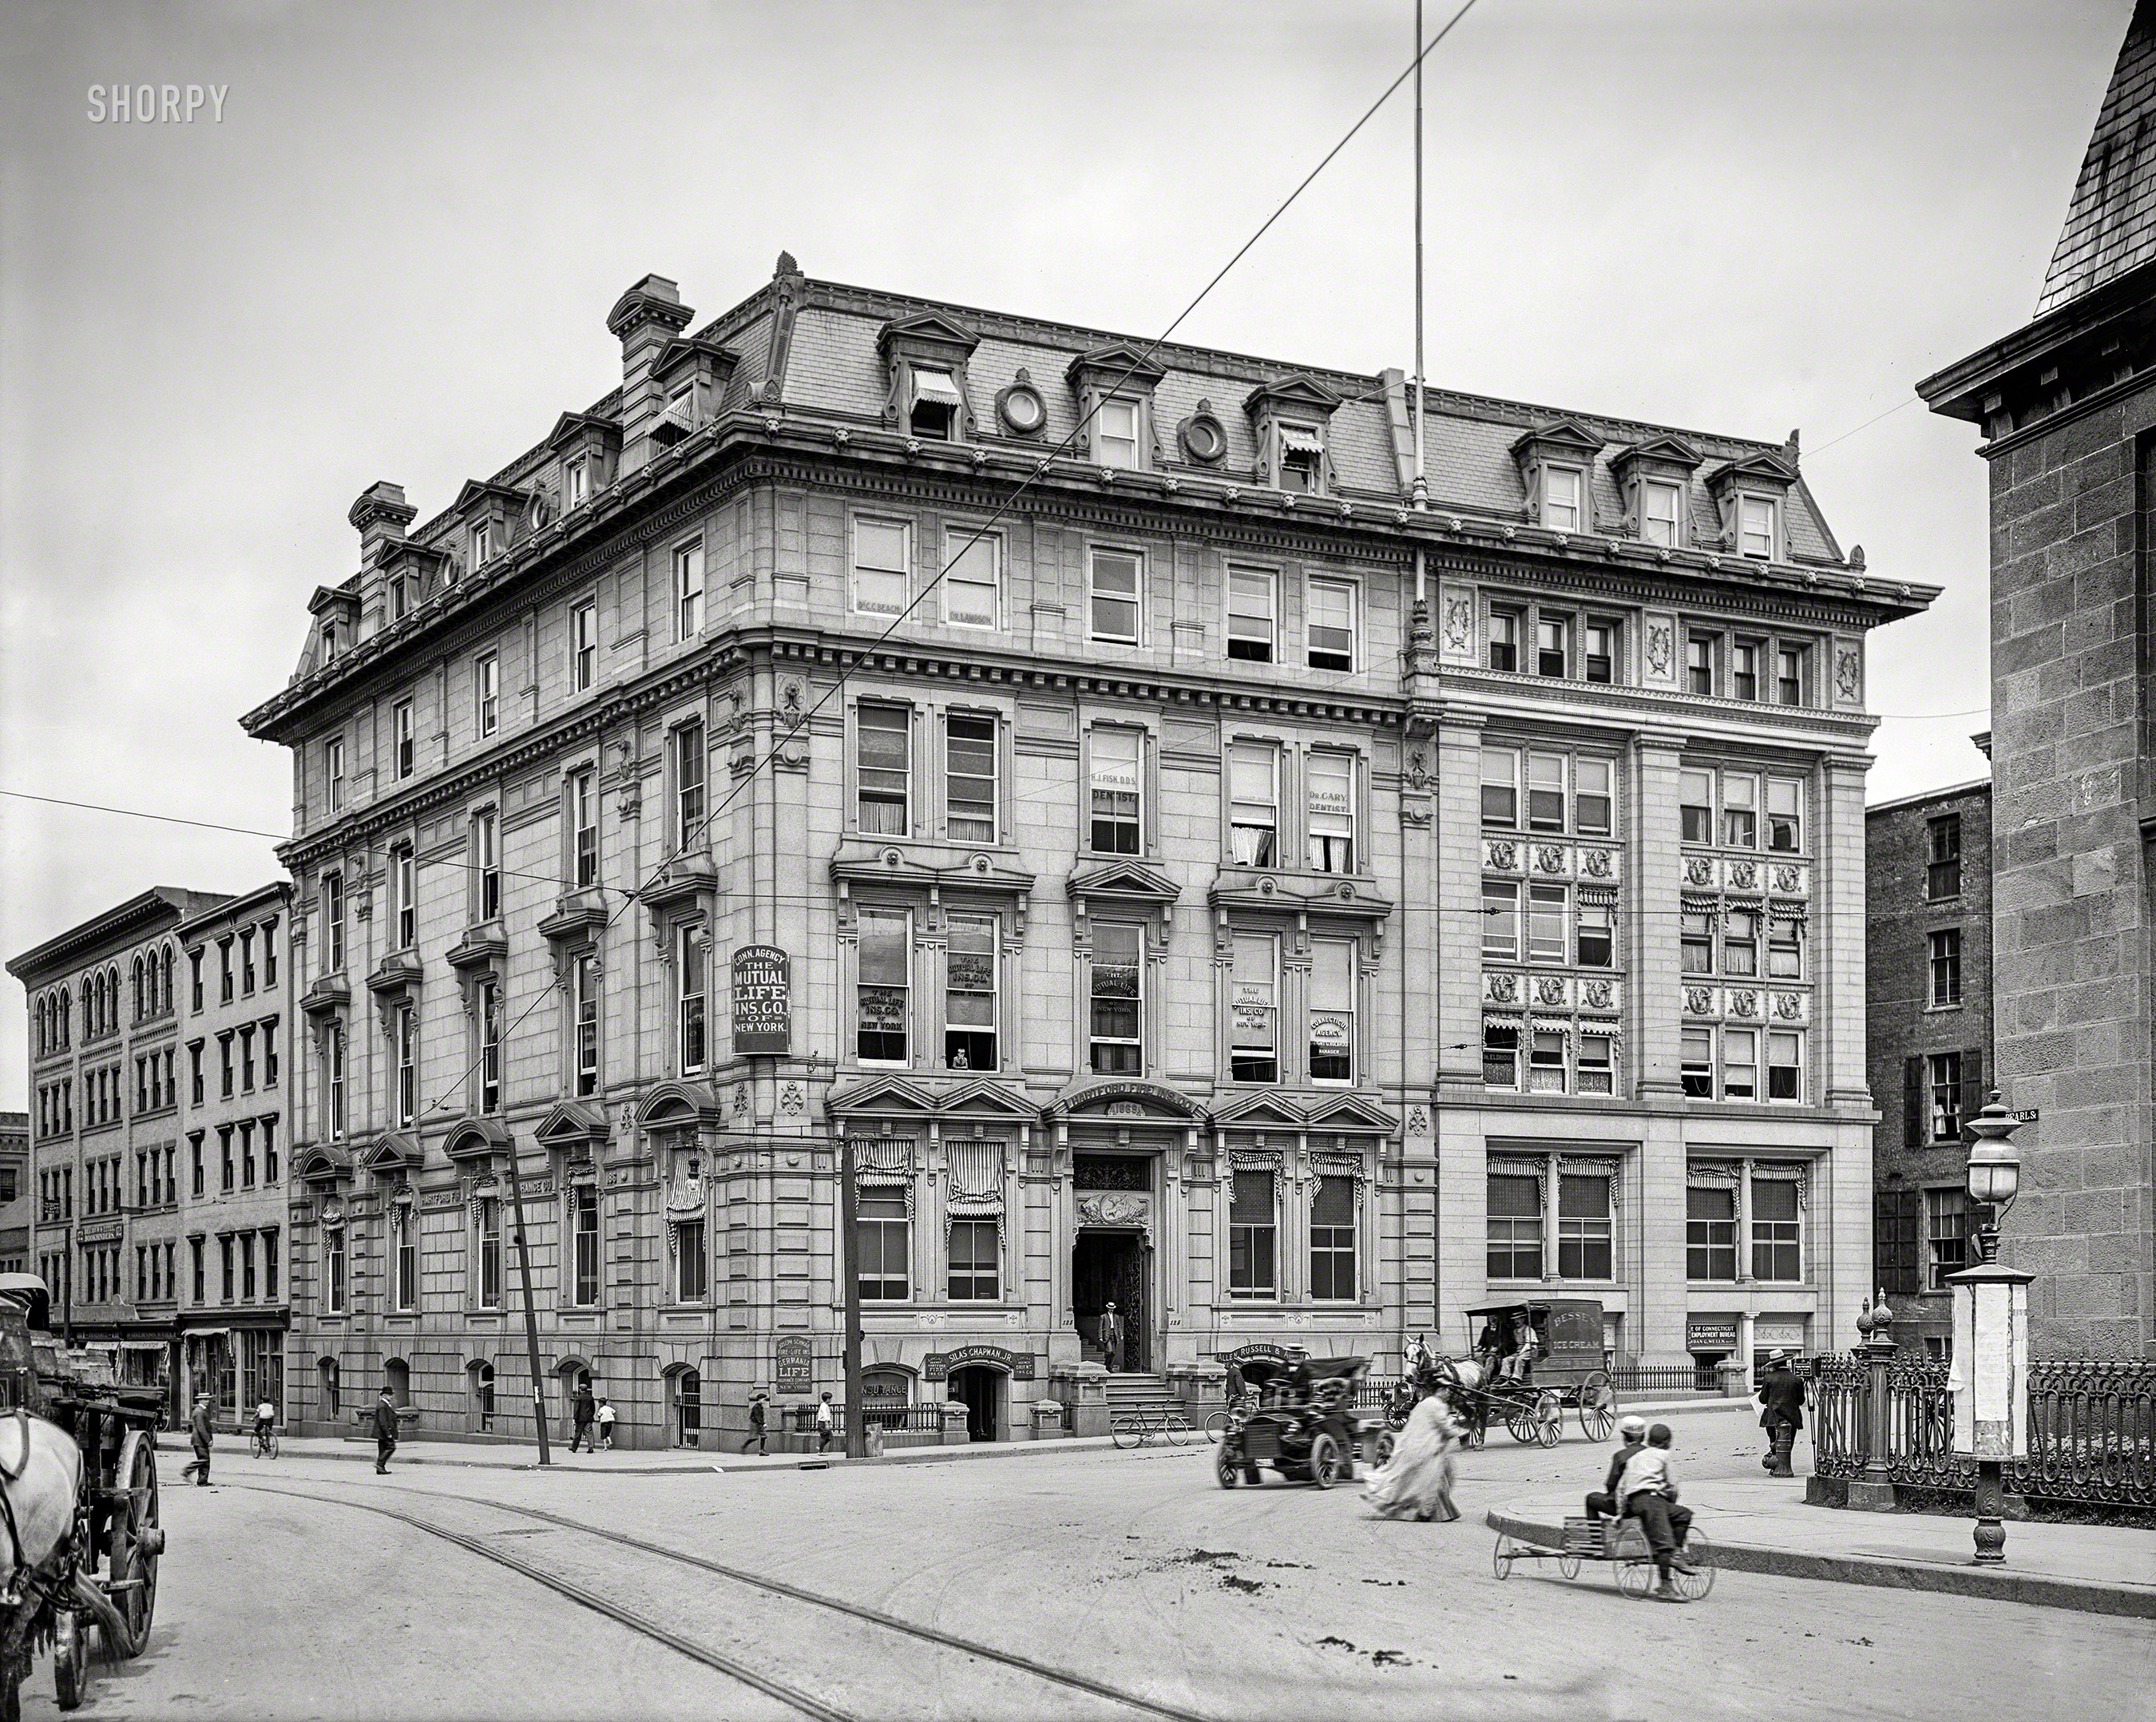 Hartford, Connecticut, circa 1907. "Hartford Fire Insurance Co." On what looks to be  Take Your Boy to Work Day. 8x10 inch glass negative, Detroit Publishing Company. View full size.